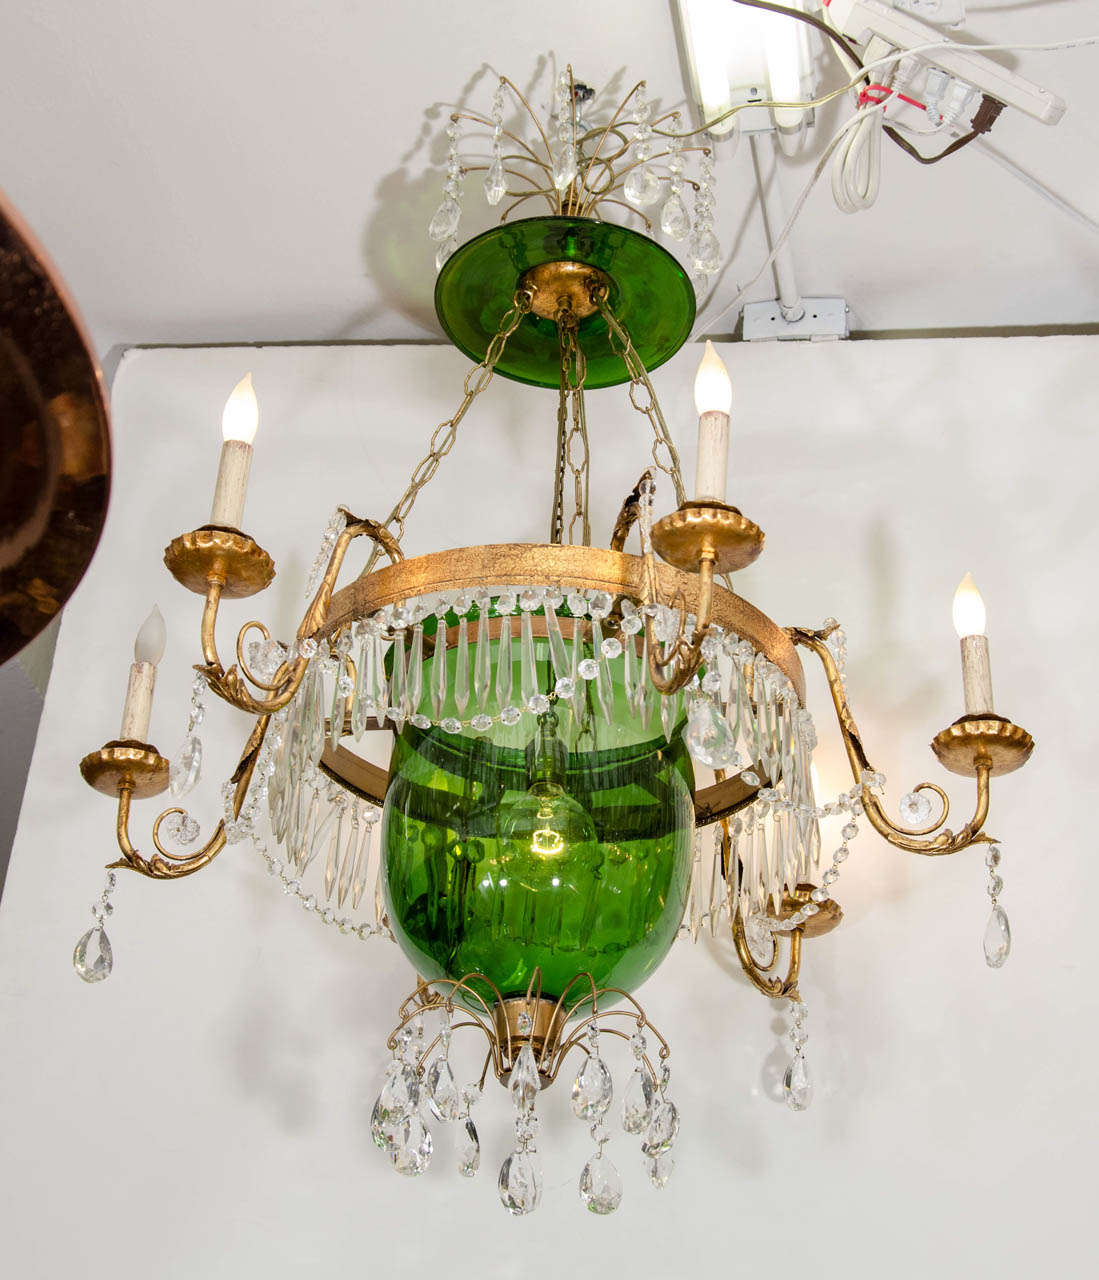 A vintage four-light green glass bell jar chandelier with crystals suspended from an ornate gilded metal frame.